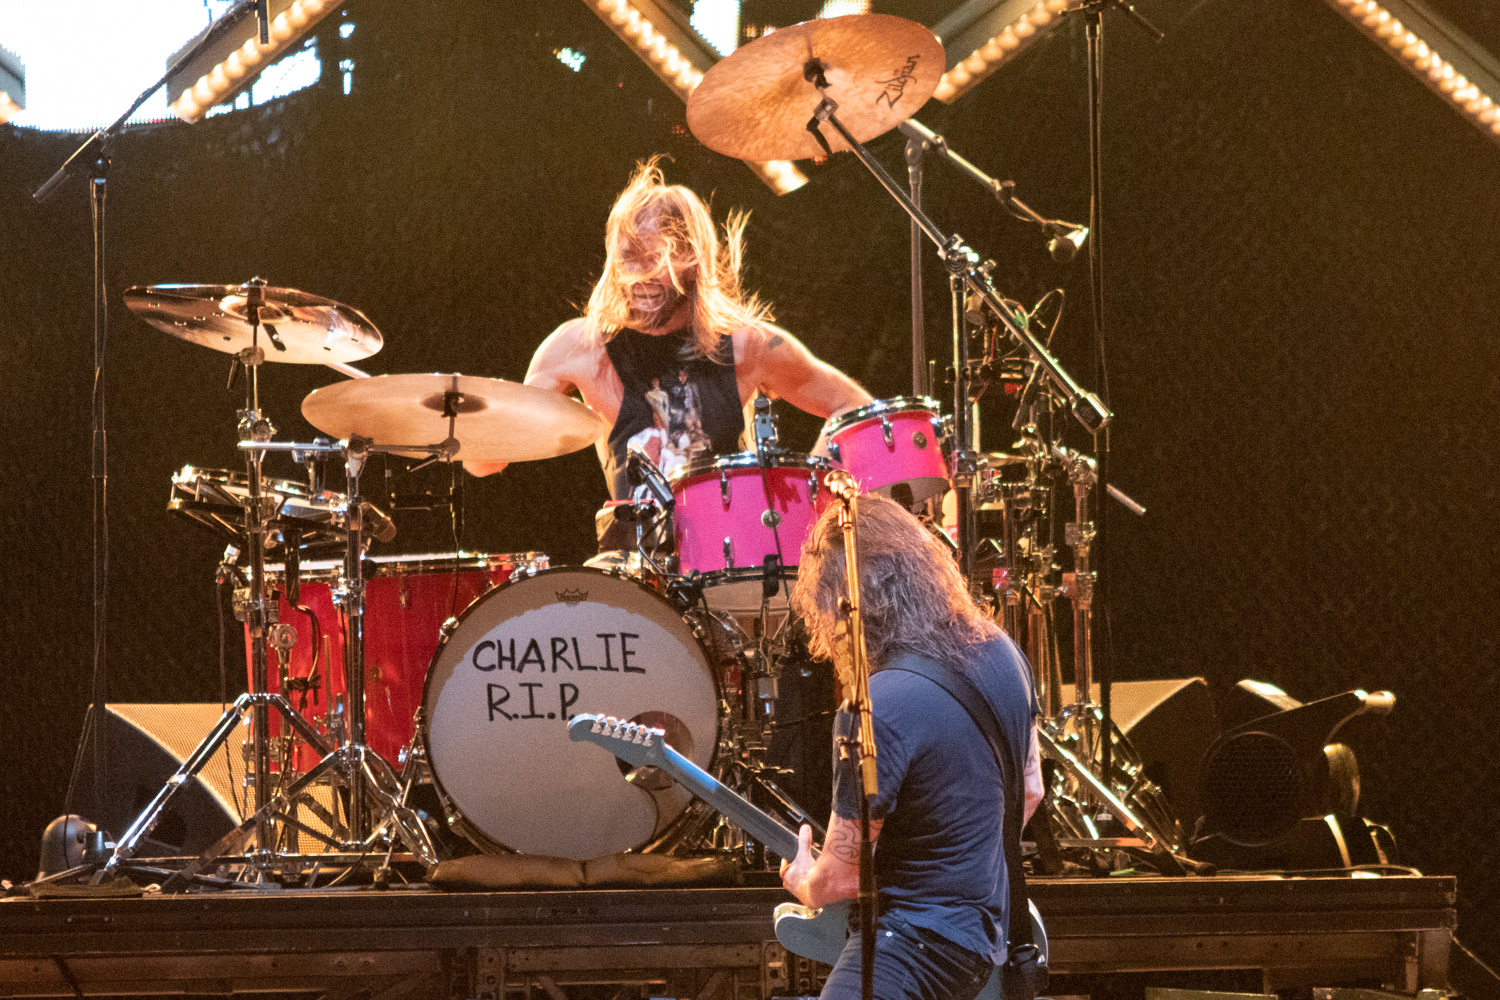 We remember Taylor Hawkins of the Foo Fighters